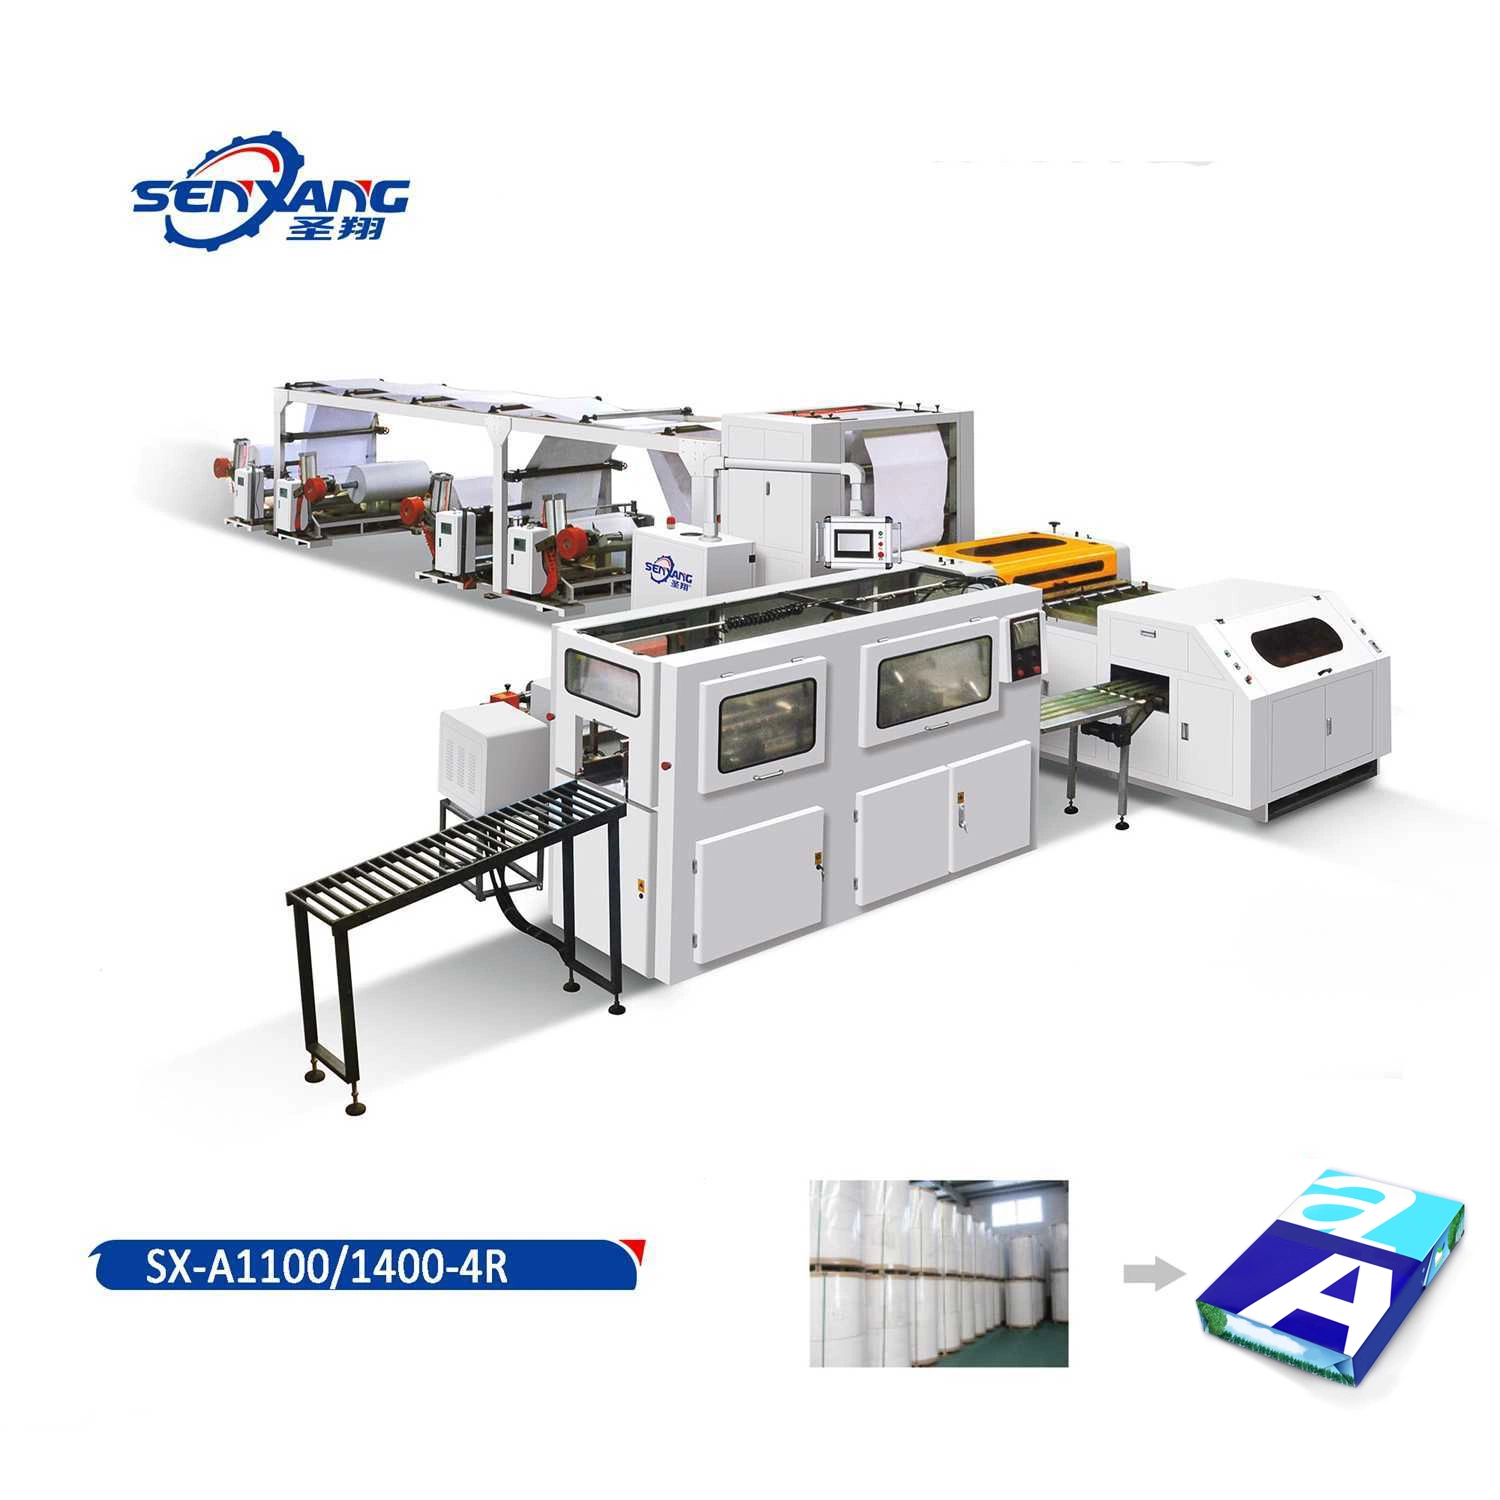 A4 Paper Cutting & Packaging Machine, Automatic Roll Cutter and Packing Machine